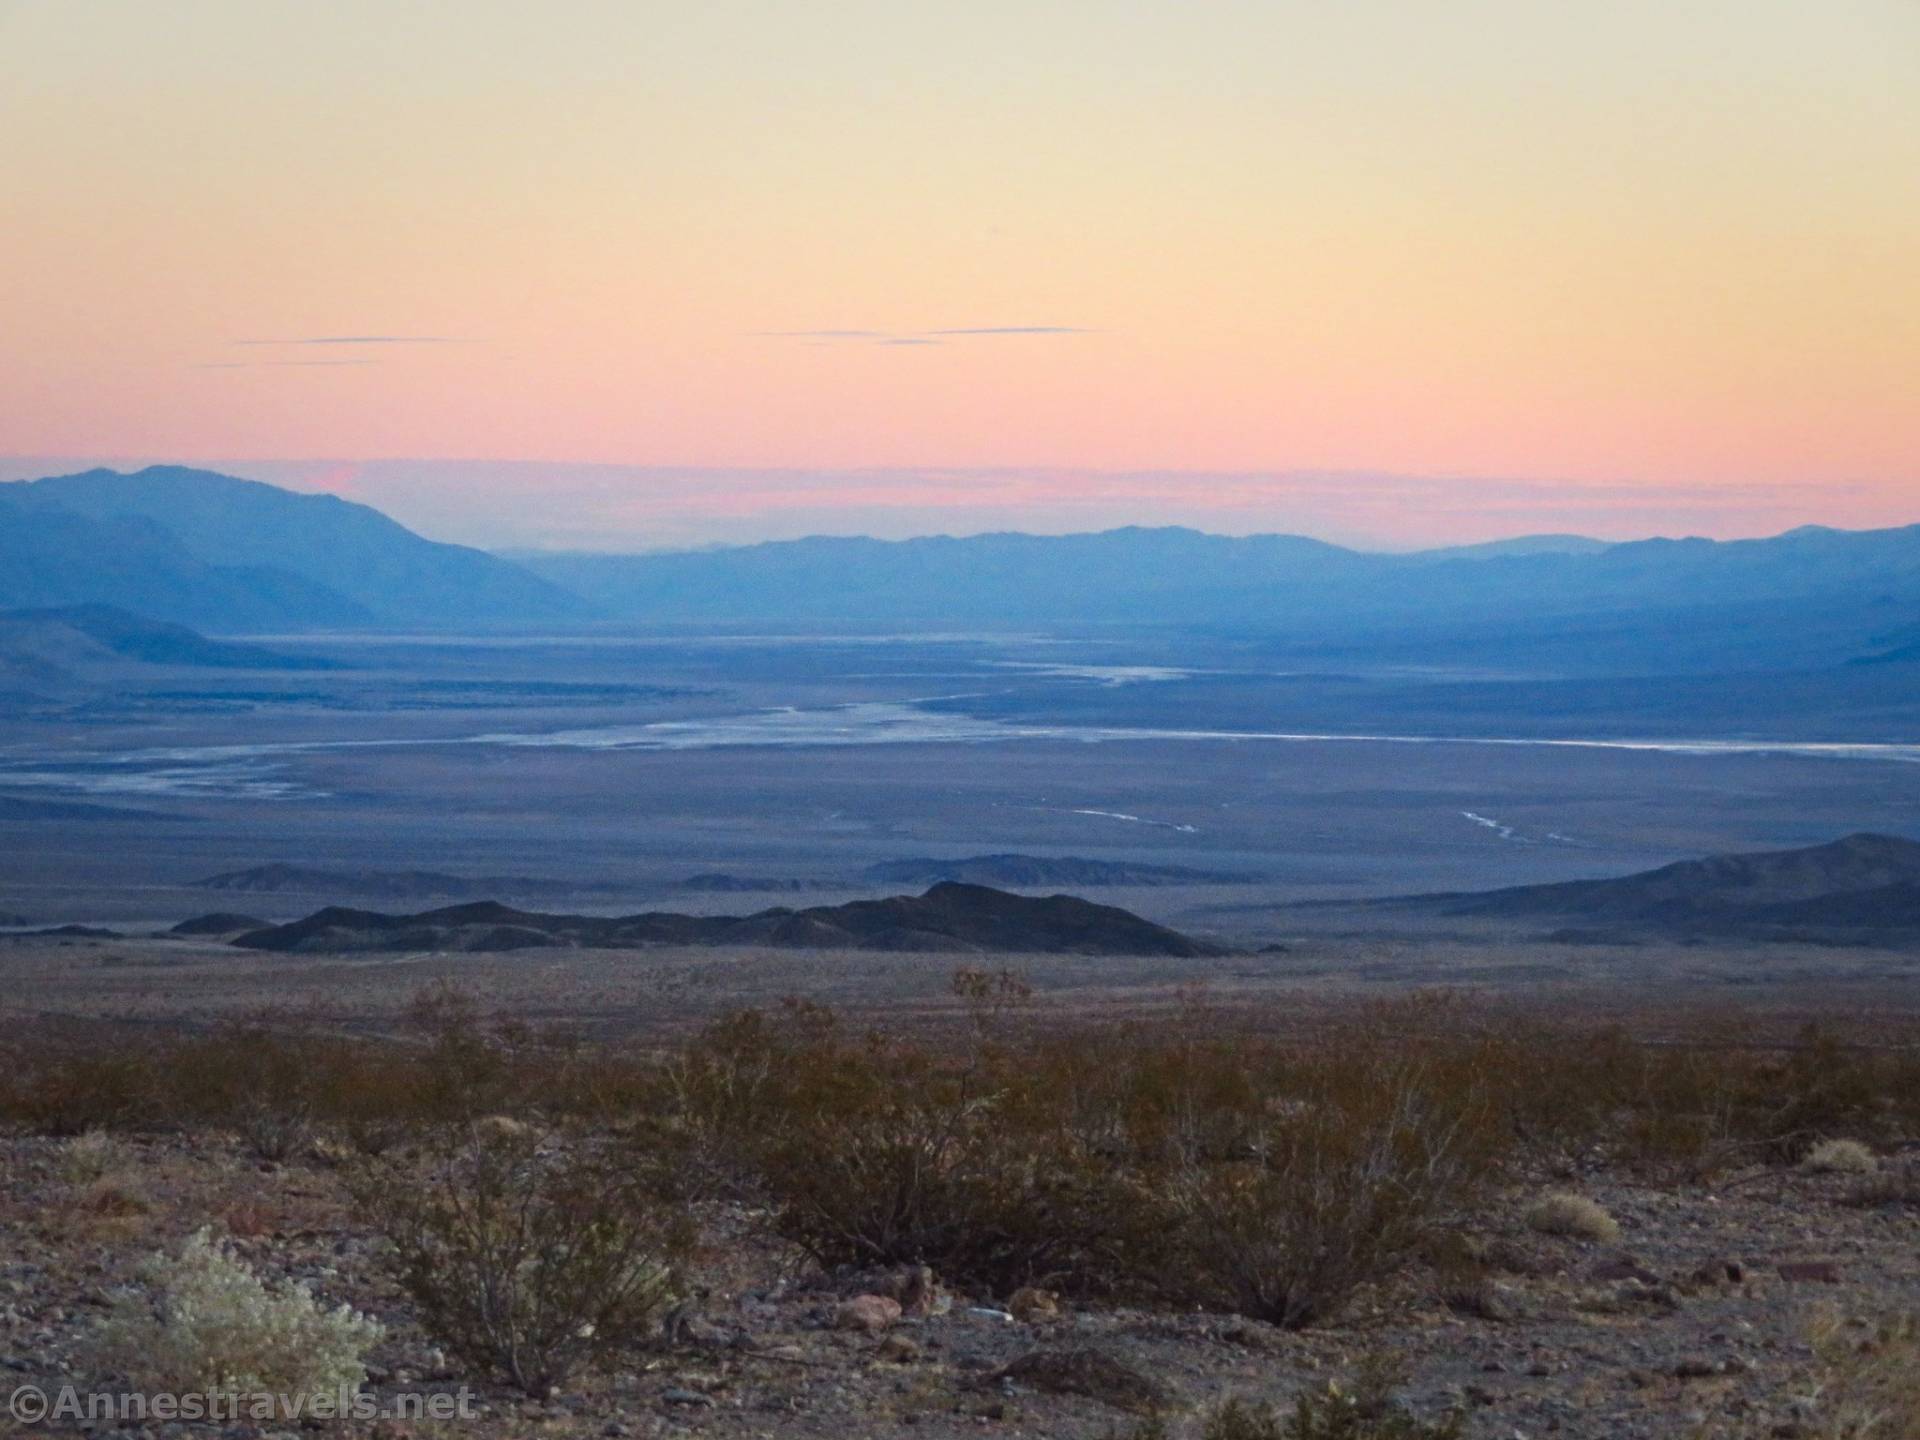 Sunset above the Beatty Cutoff Road, Death Valley National Park, California